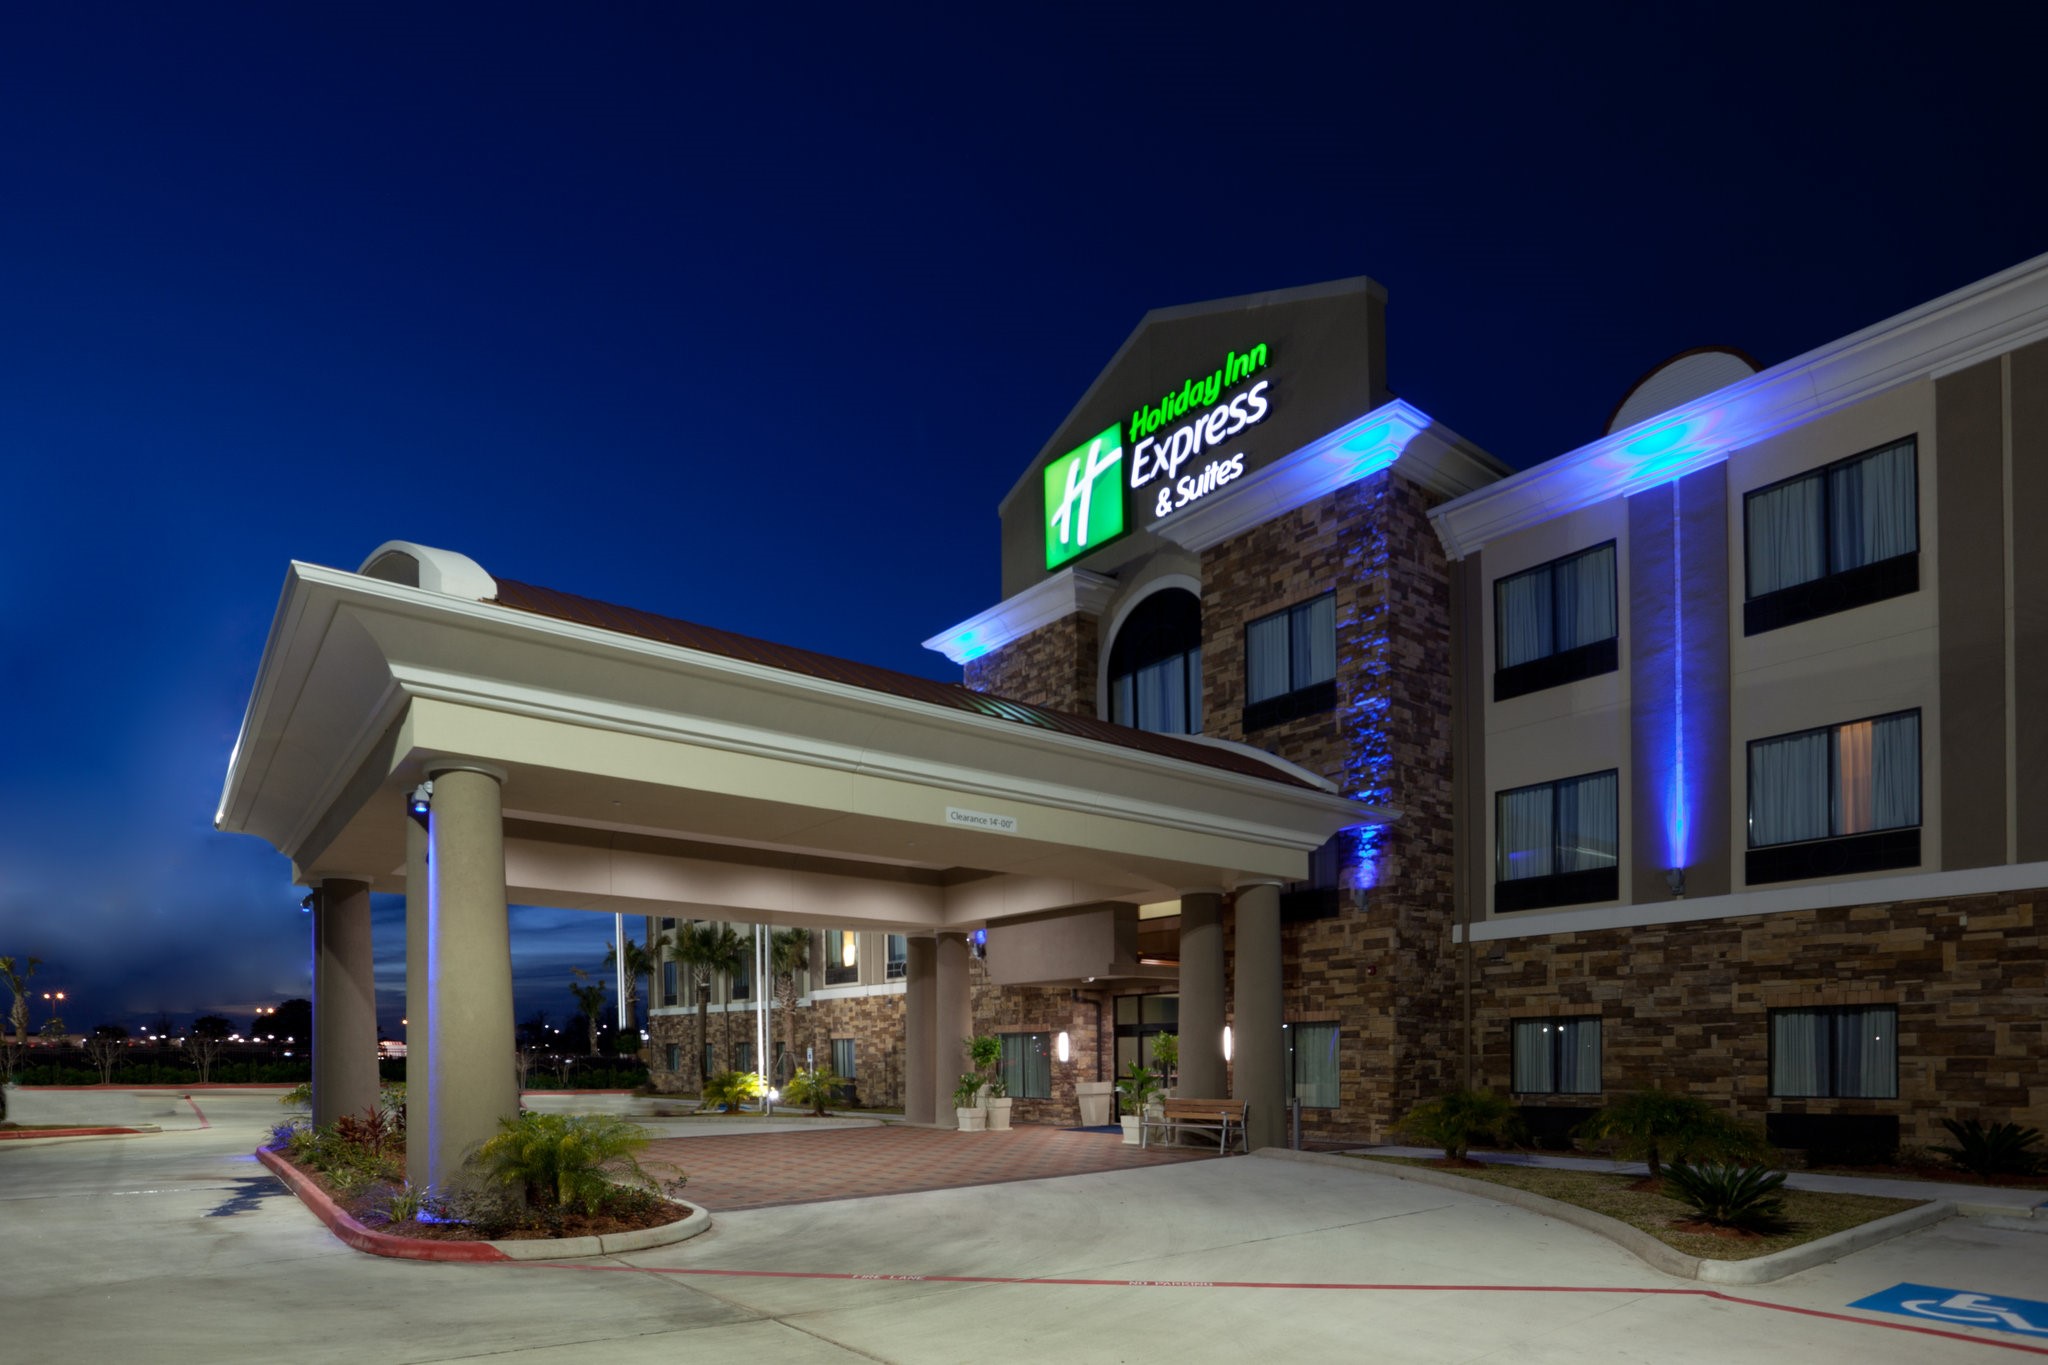 Meeting Rooms at Holiday Inn Express & Suites HOUSTON NW BELTWAY 8WEST